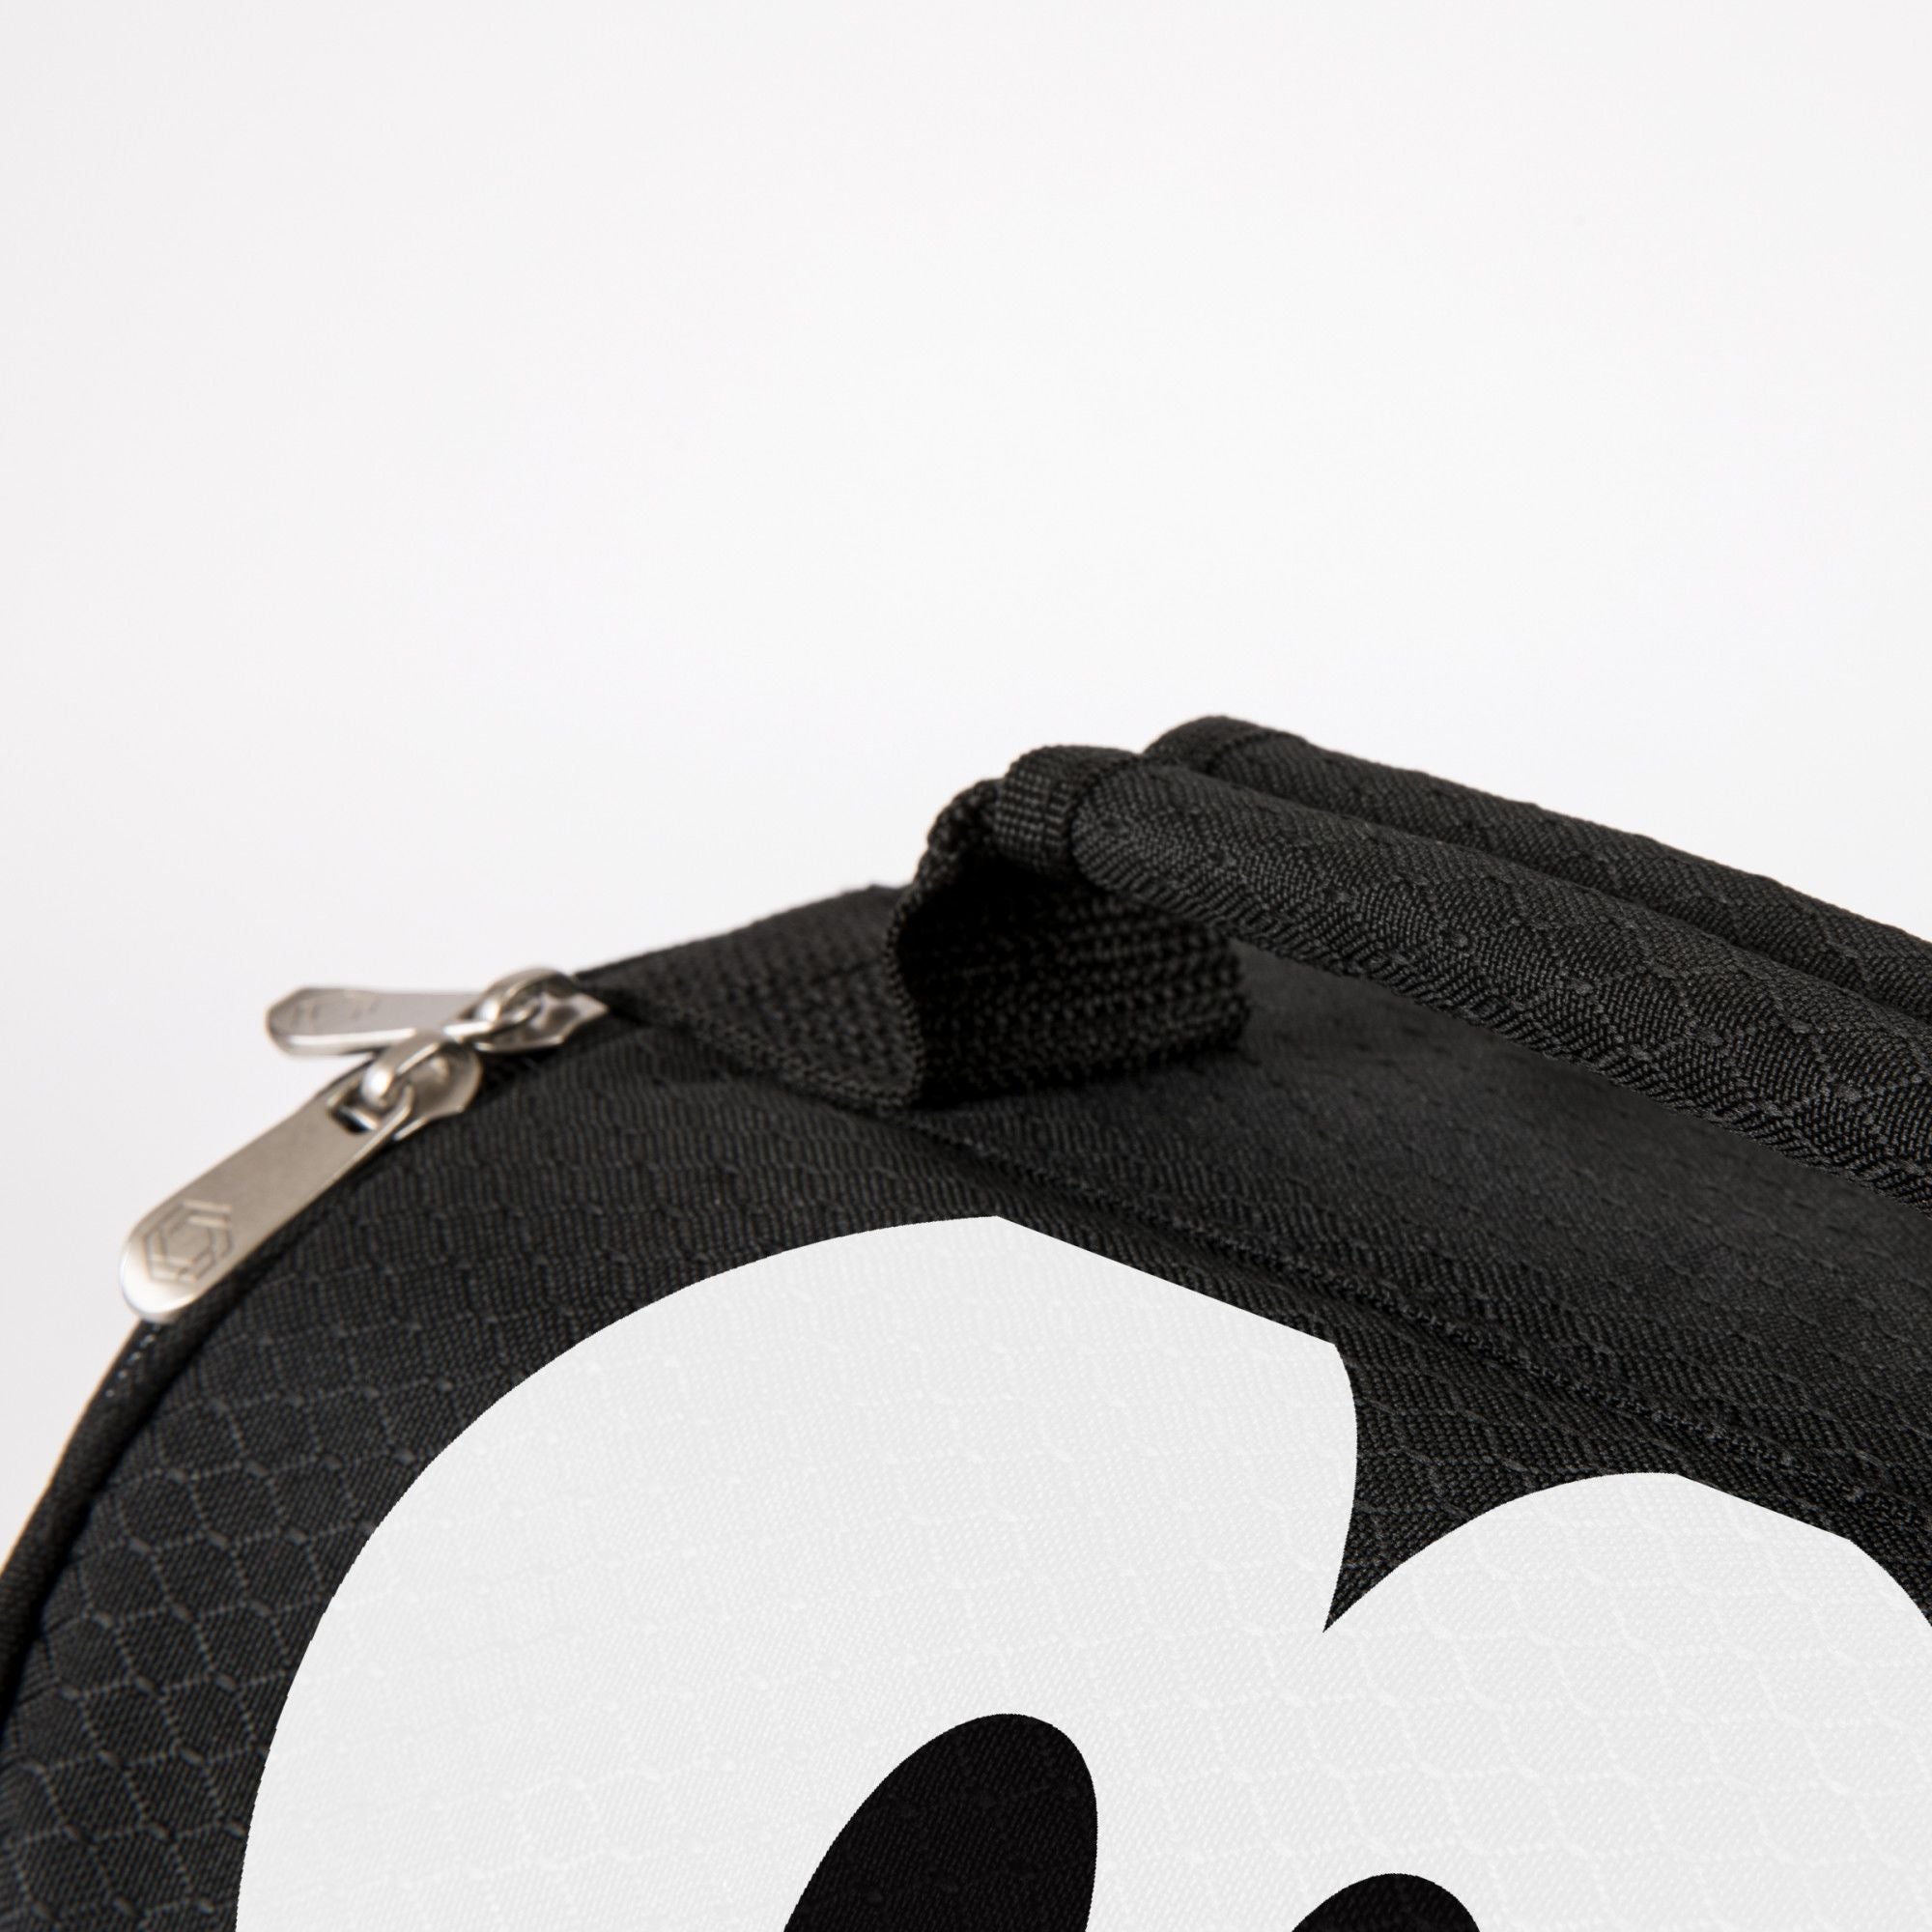 Picnic Time Black Mickey Mouse - 'Pranzo' Lunch Tote